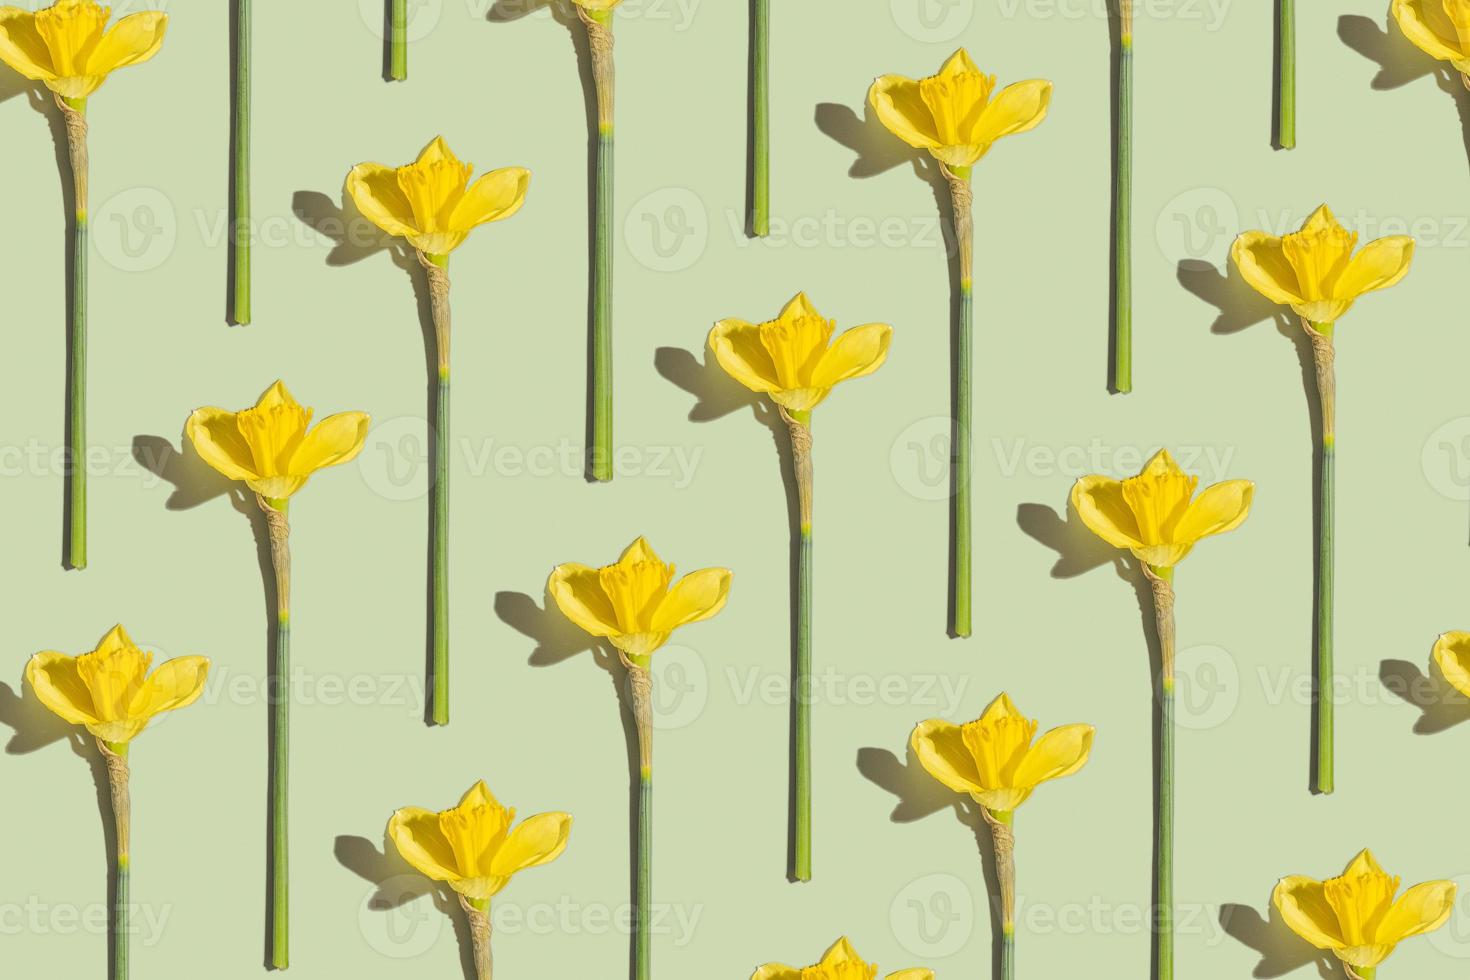 Daffodils flower pattern on green background. Spring time concept photo